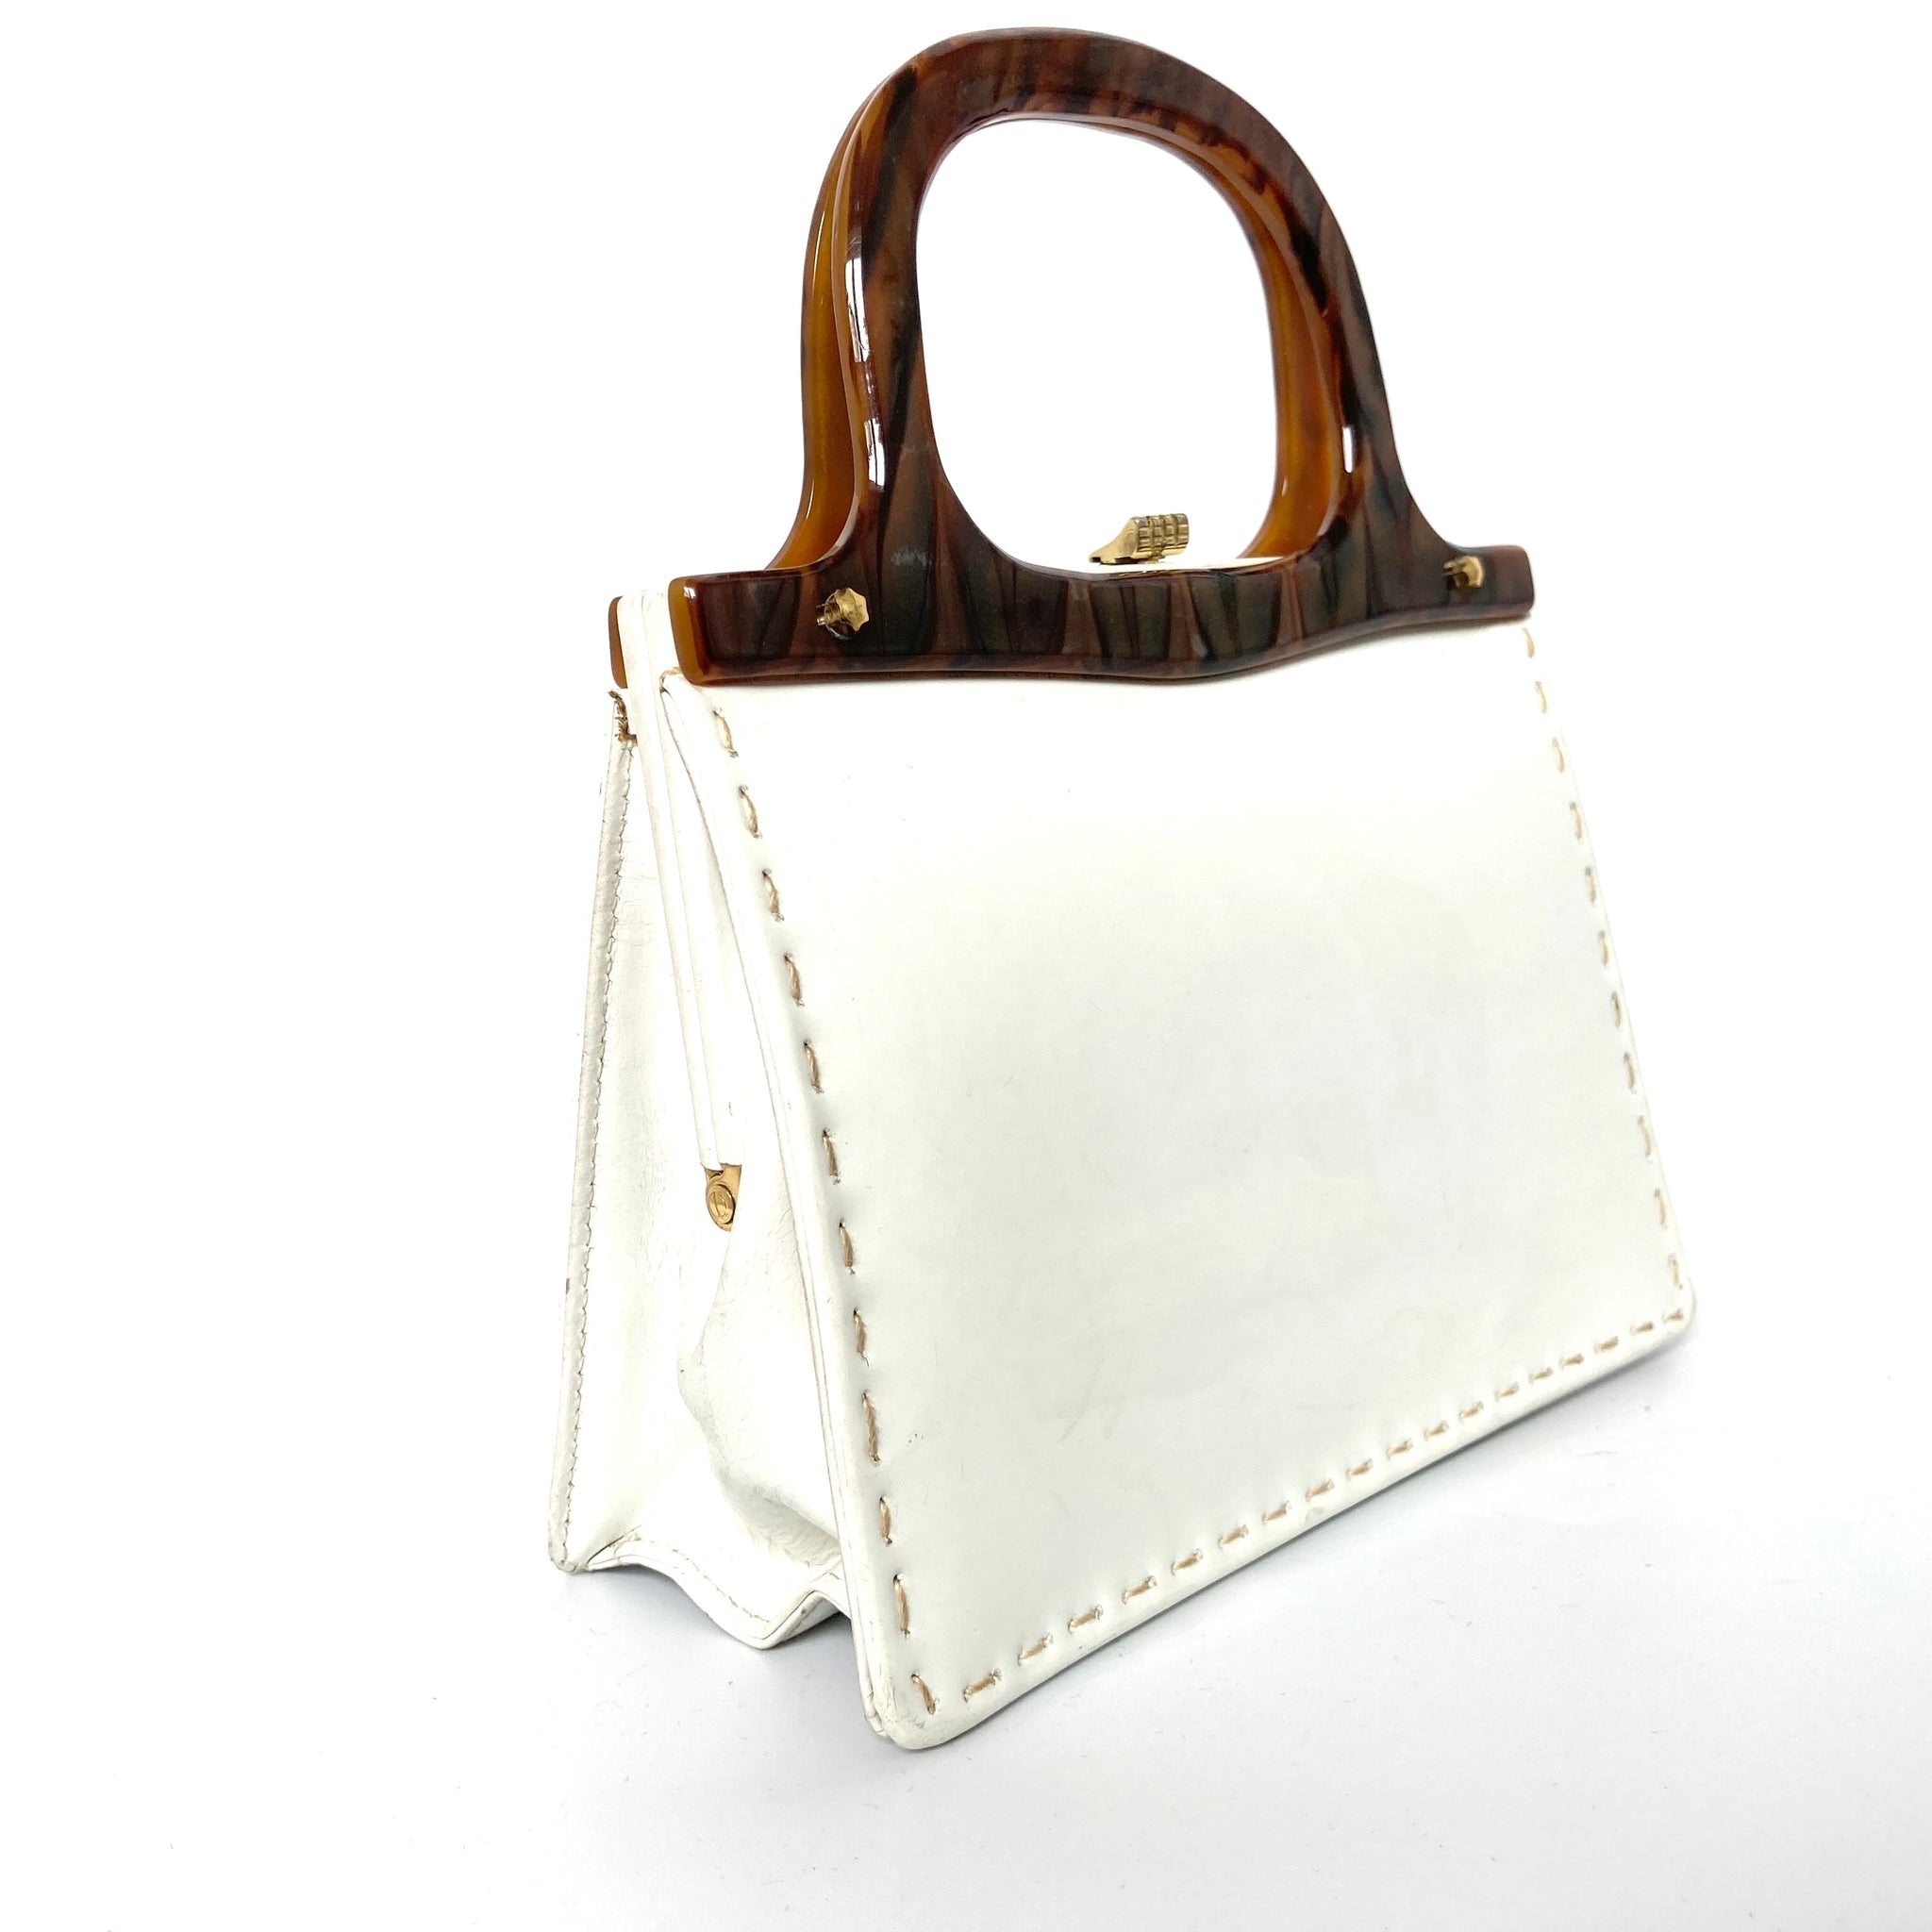 Buy LaFille Latest Croco Texture Handbags for Women & Girls | Ladies Purse  & Tote Bag | Handbags for Office & College (White) | DGN241 Online at Best  Prices in India - JioMart.